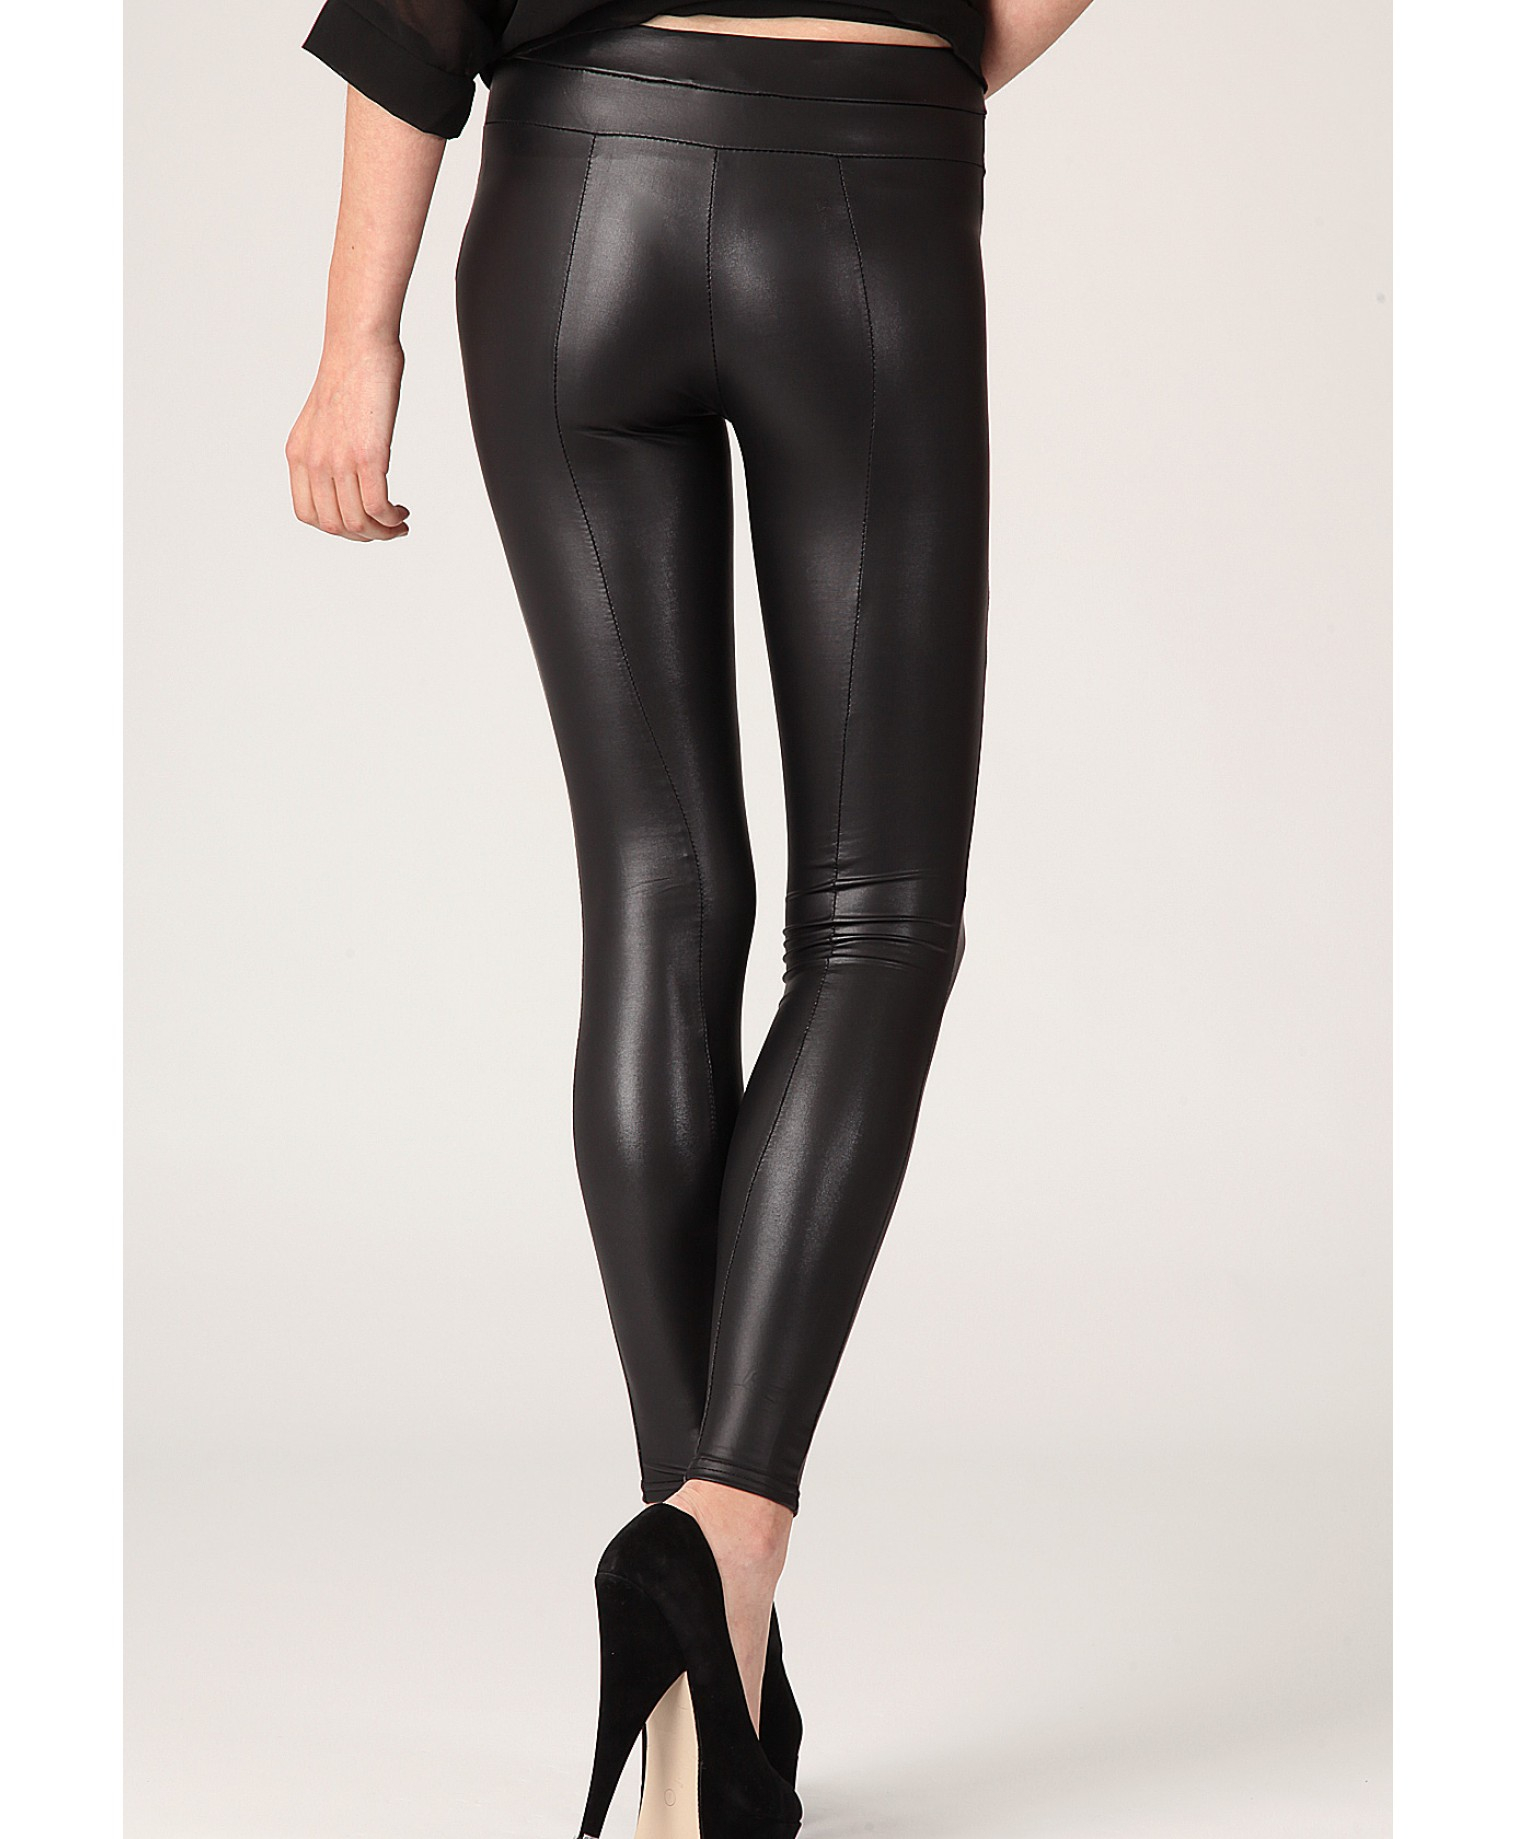 20 Best Faux Leather Leggings for Women Over 50